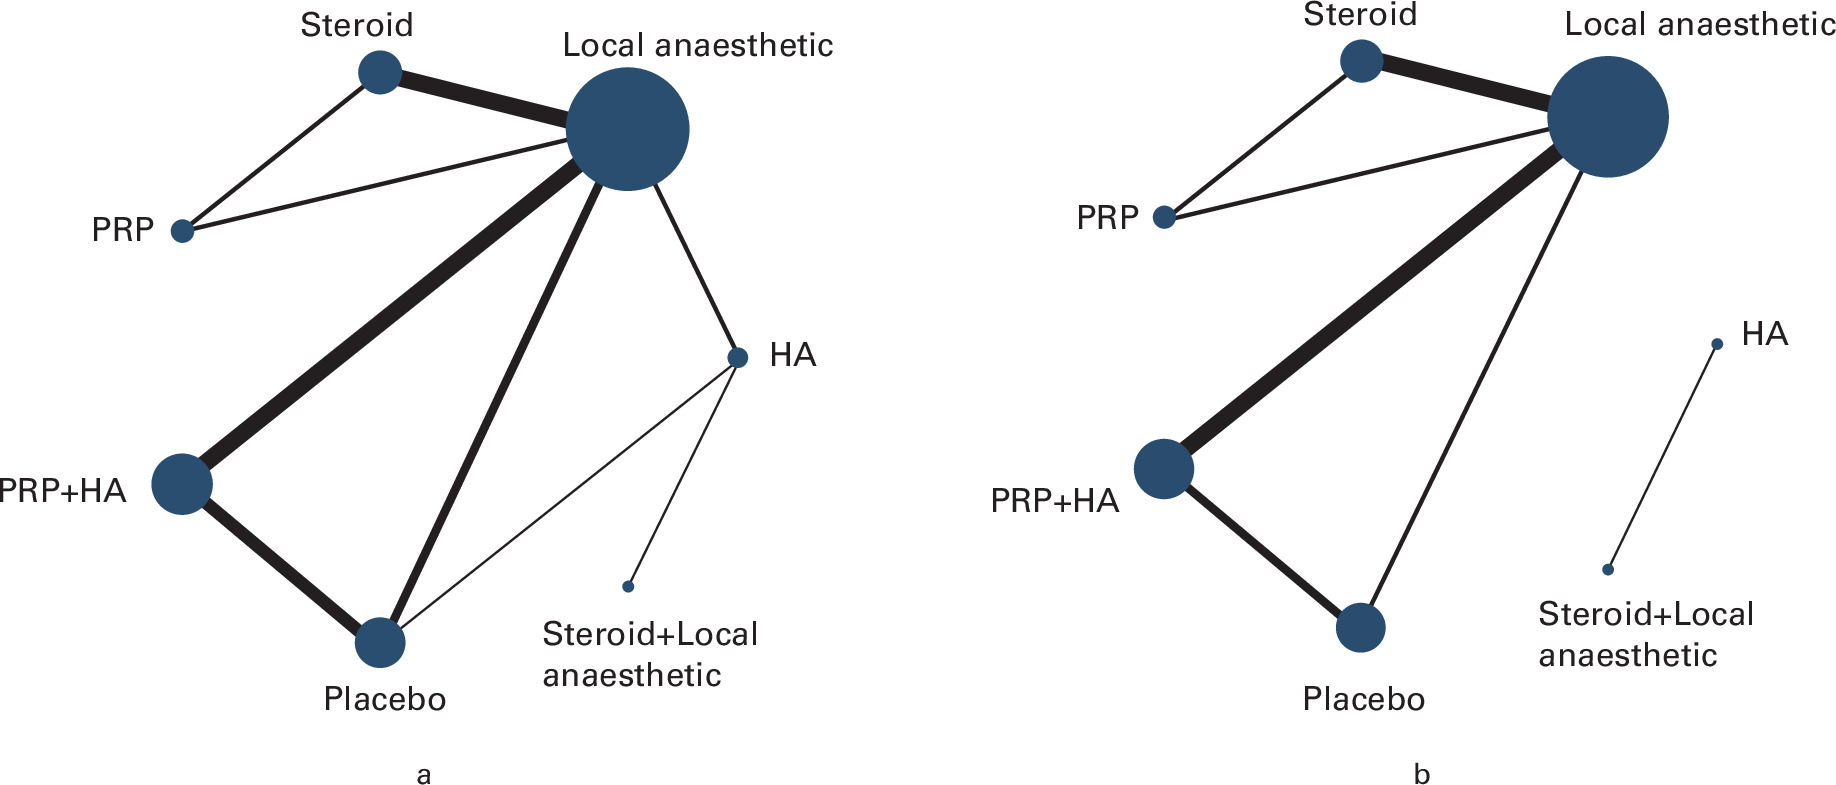 Fig. 2 
          Network diagram of a) visual analogue scale score and b) Western Ontario and McMaster Universities Osteoarthritis Index score at three months. HA, hyaluronic acid; PRP, platelet-rich plasma.
        